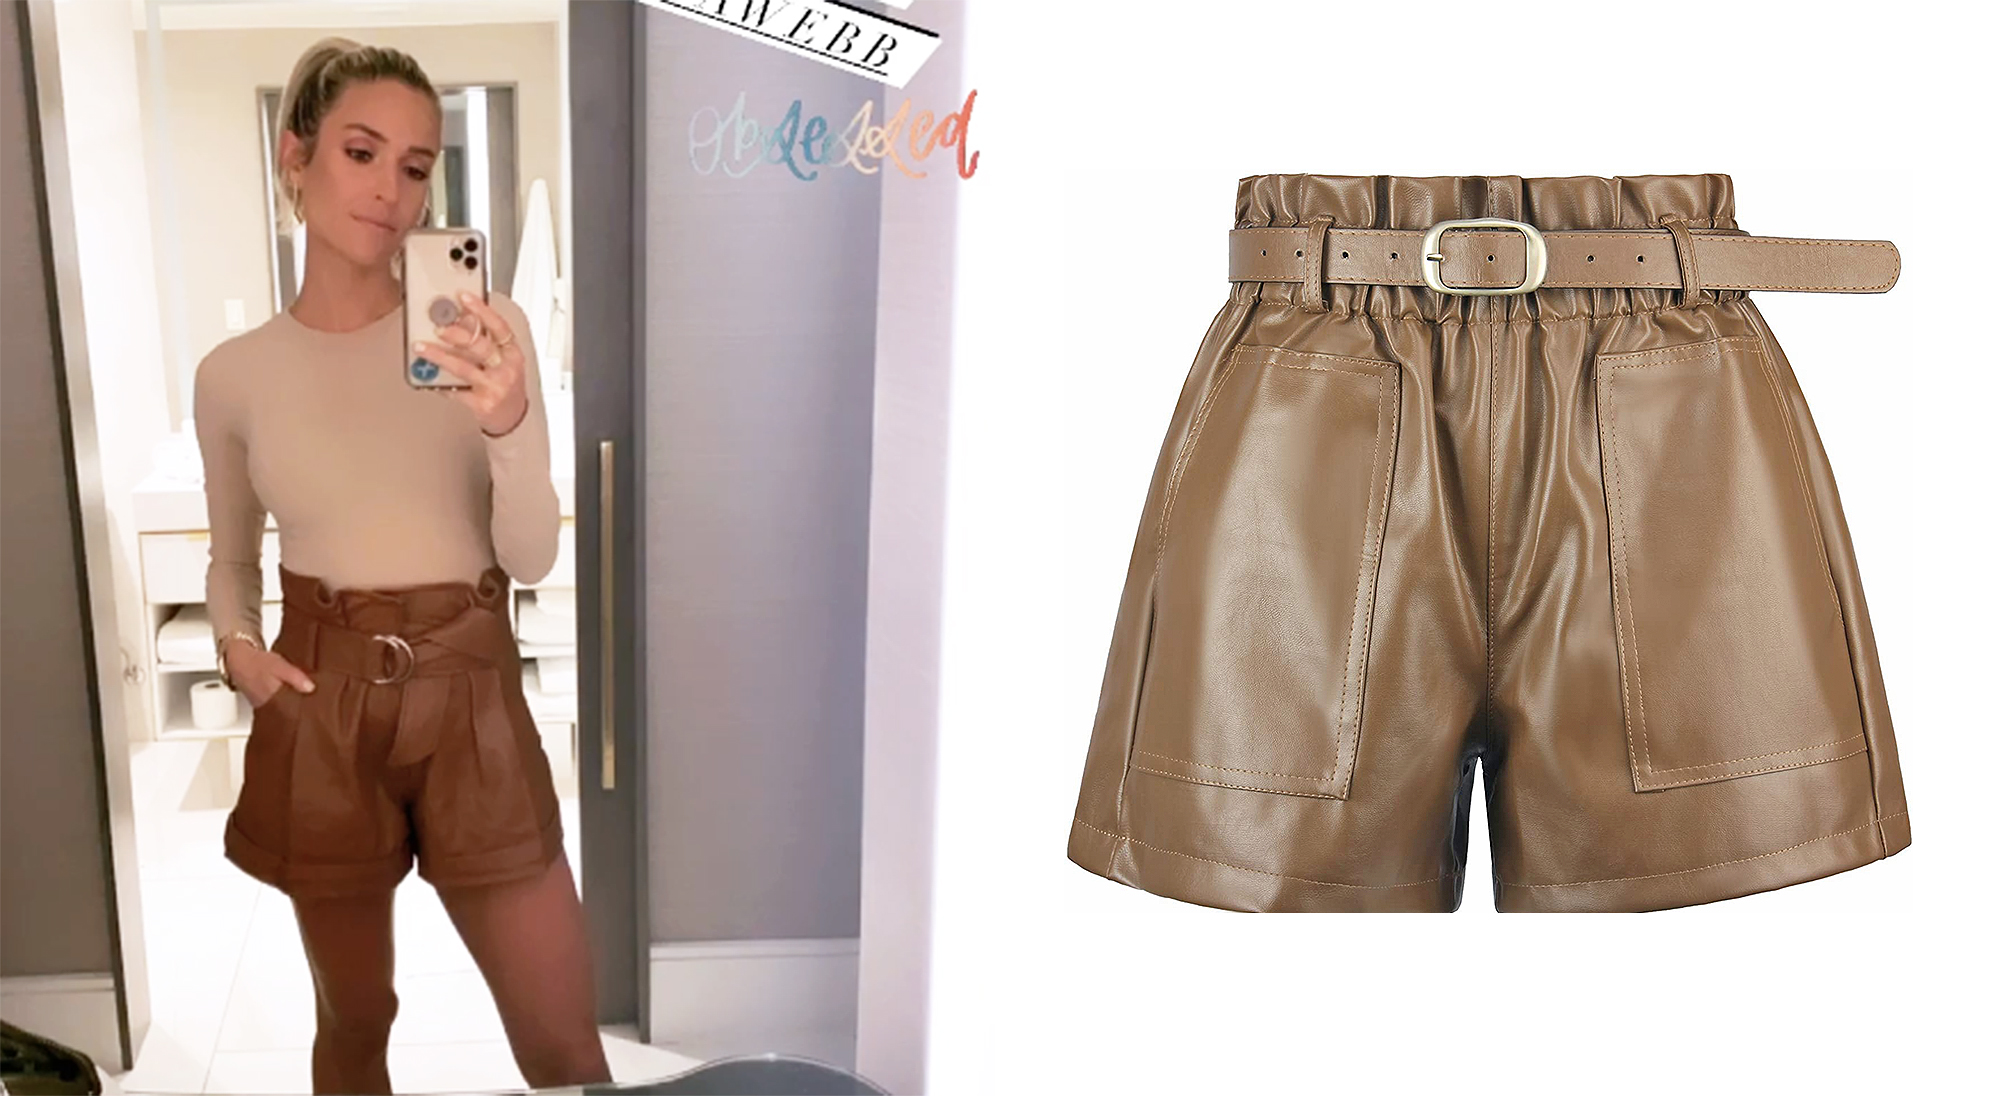 Kristin Cavallari's $425 Leather Shorts: Check Out This $25 Pair